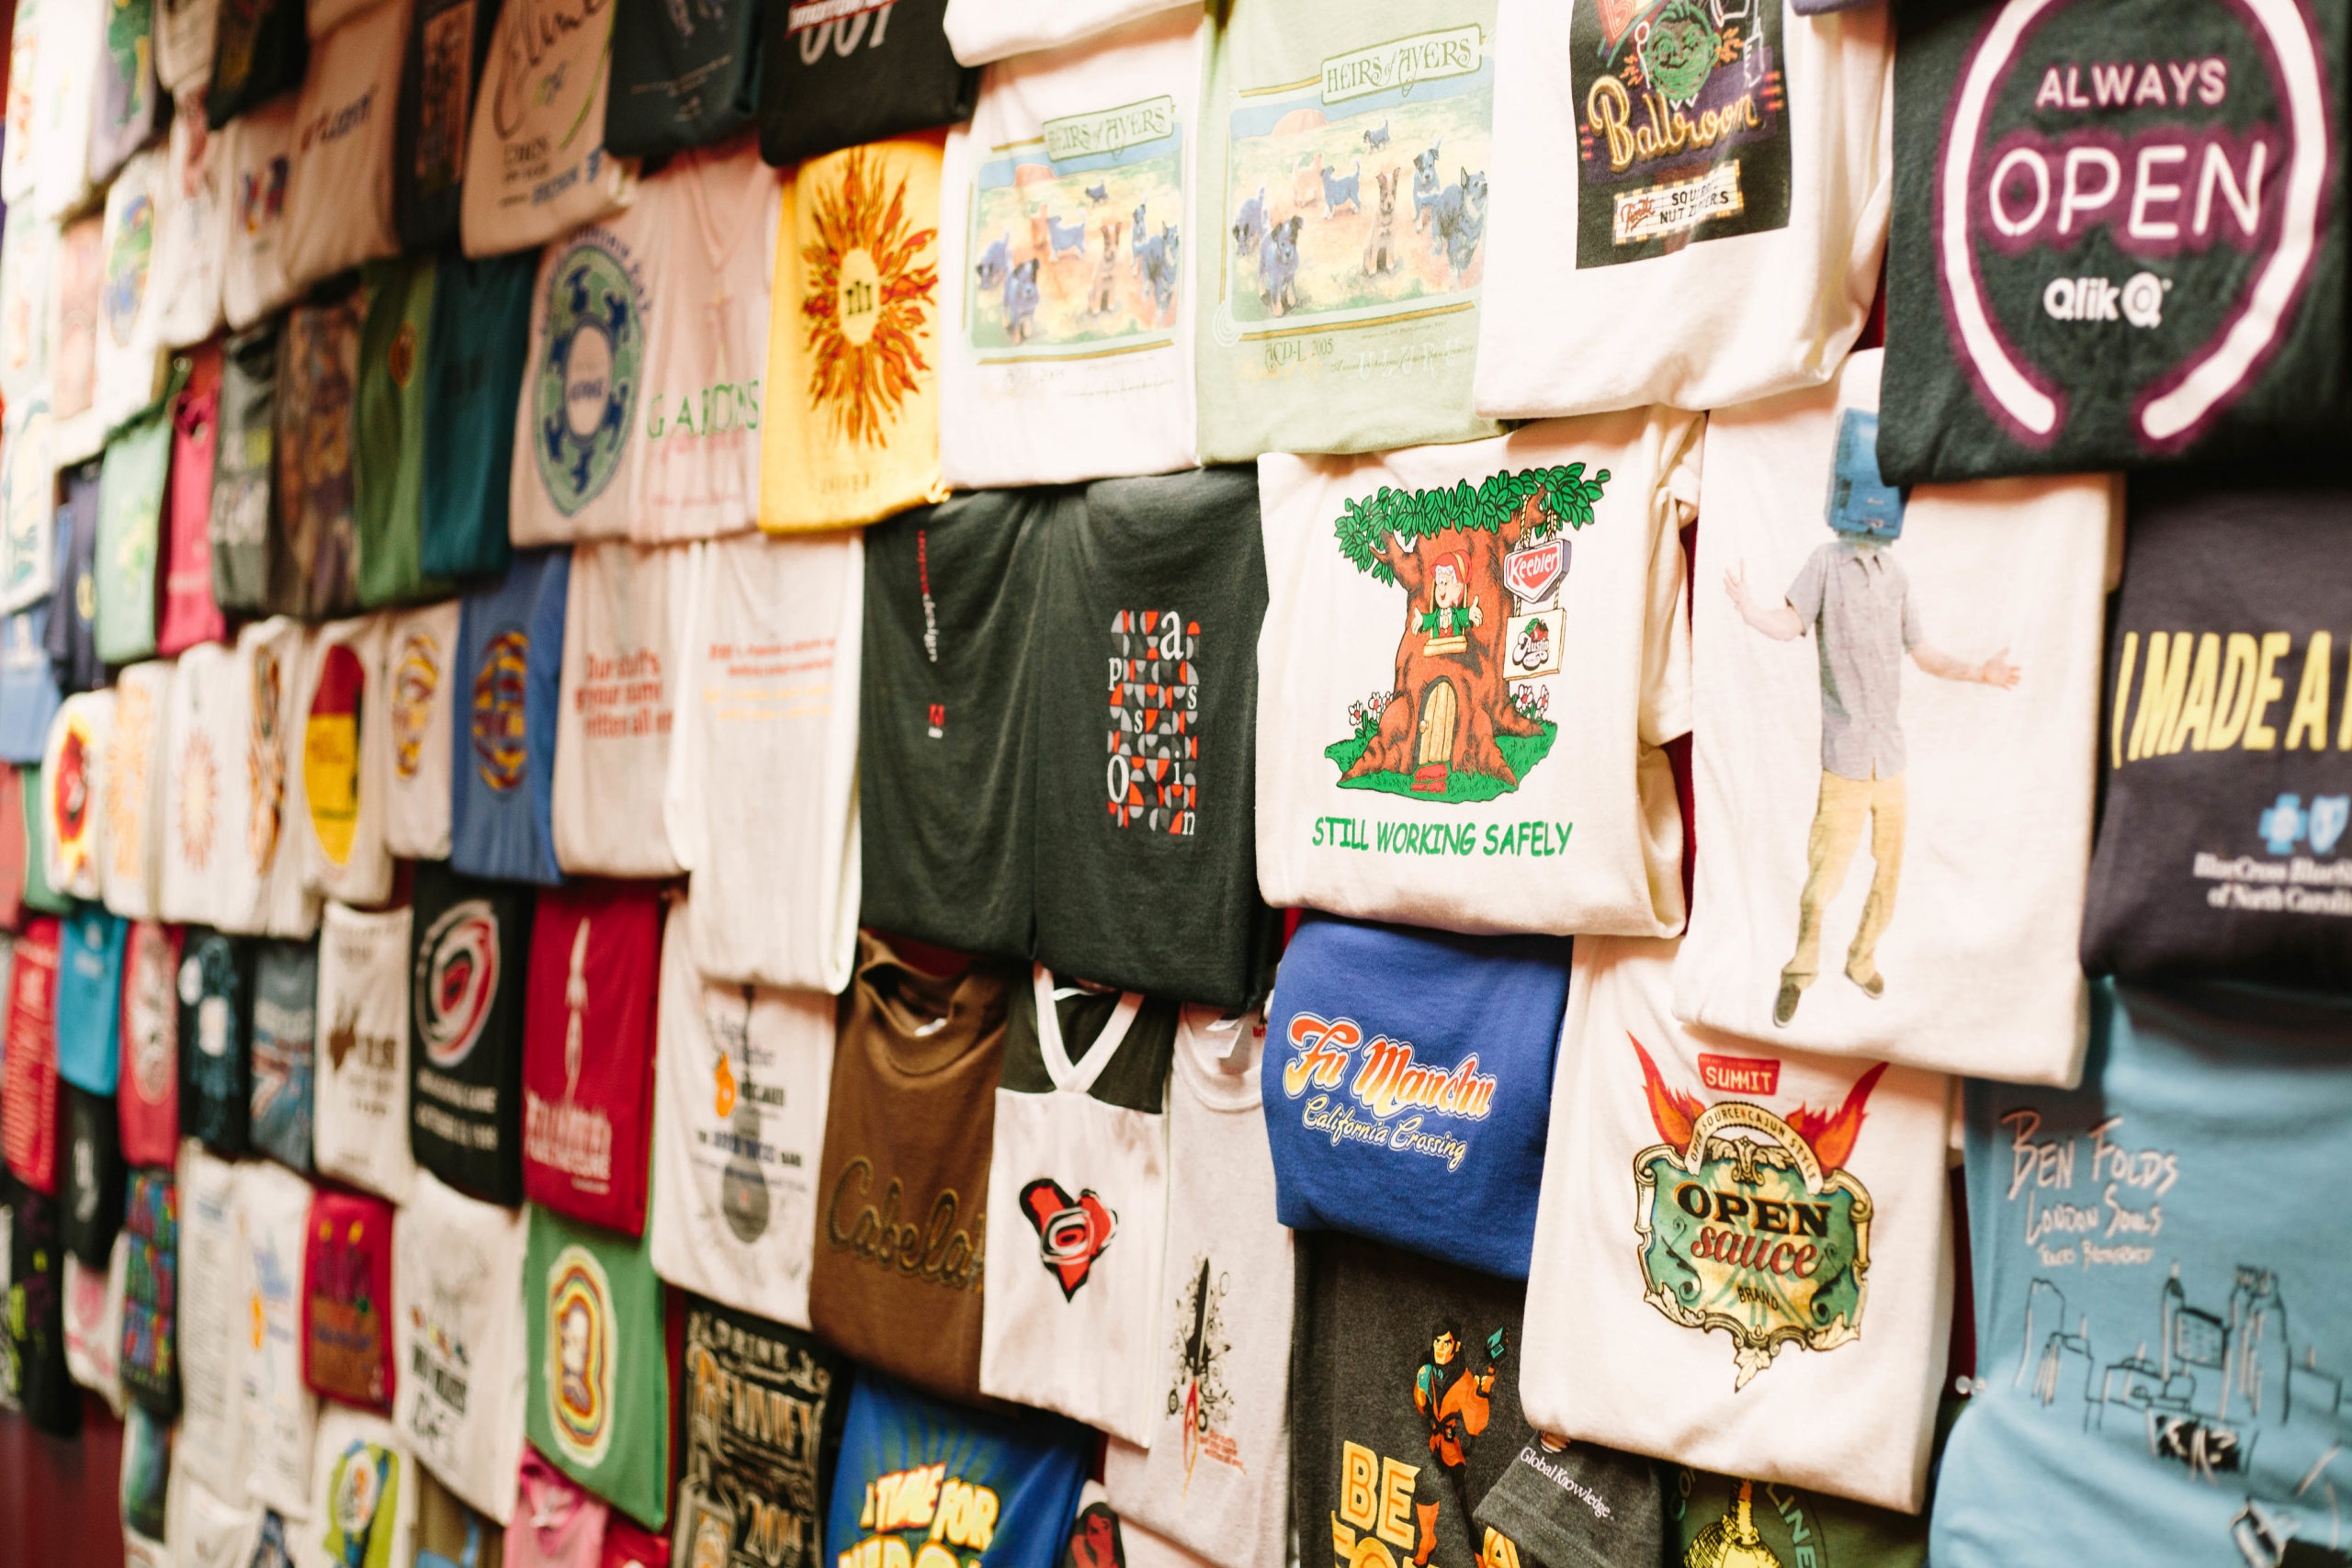 Wall of t-shirts with different designs and colors